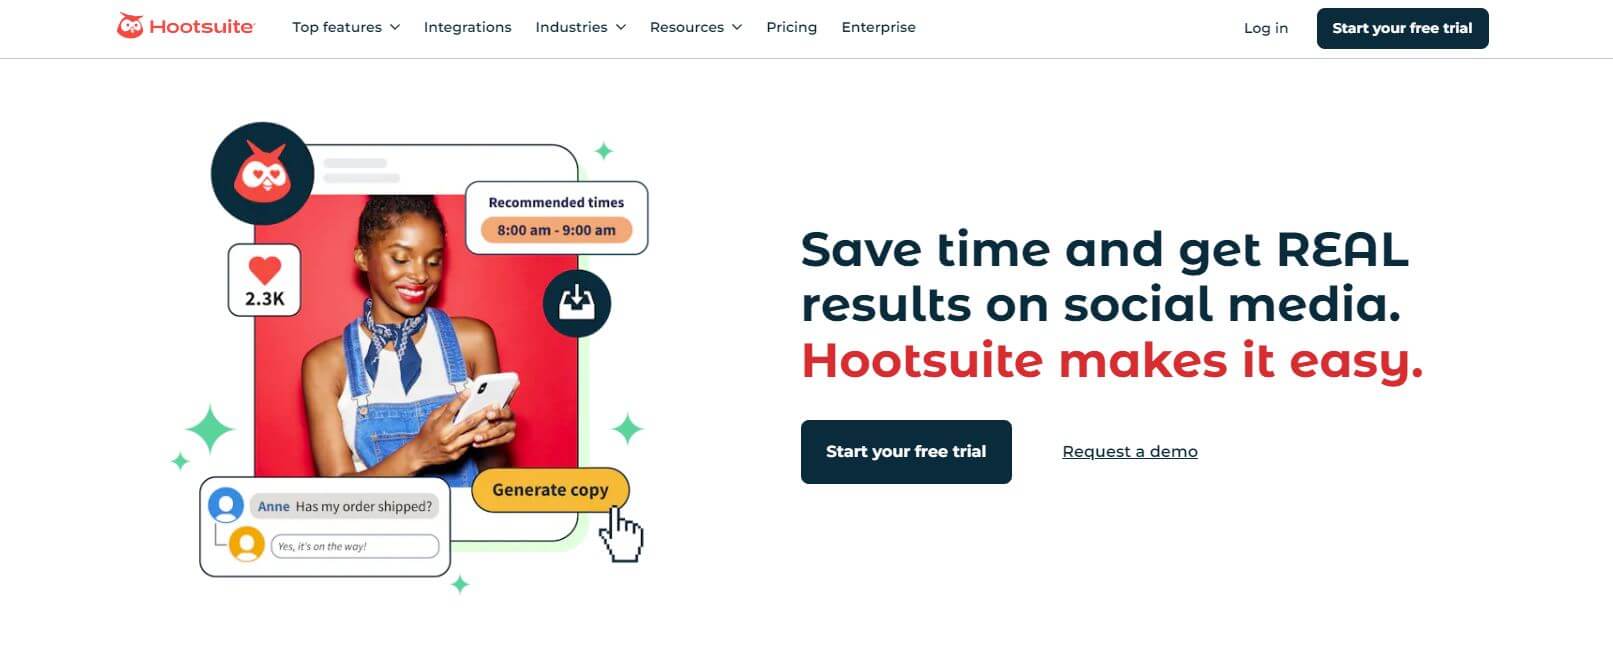 Hootsuite homepage promoting their social media management tool, featuring a woman using a smartphone and various engagement metrics. Call-to-action button for a free trial.